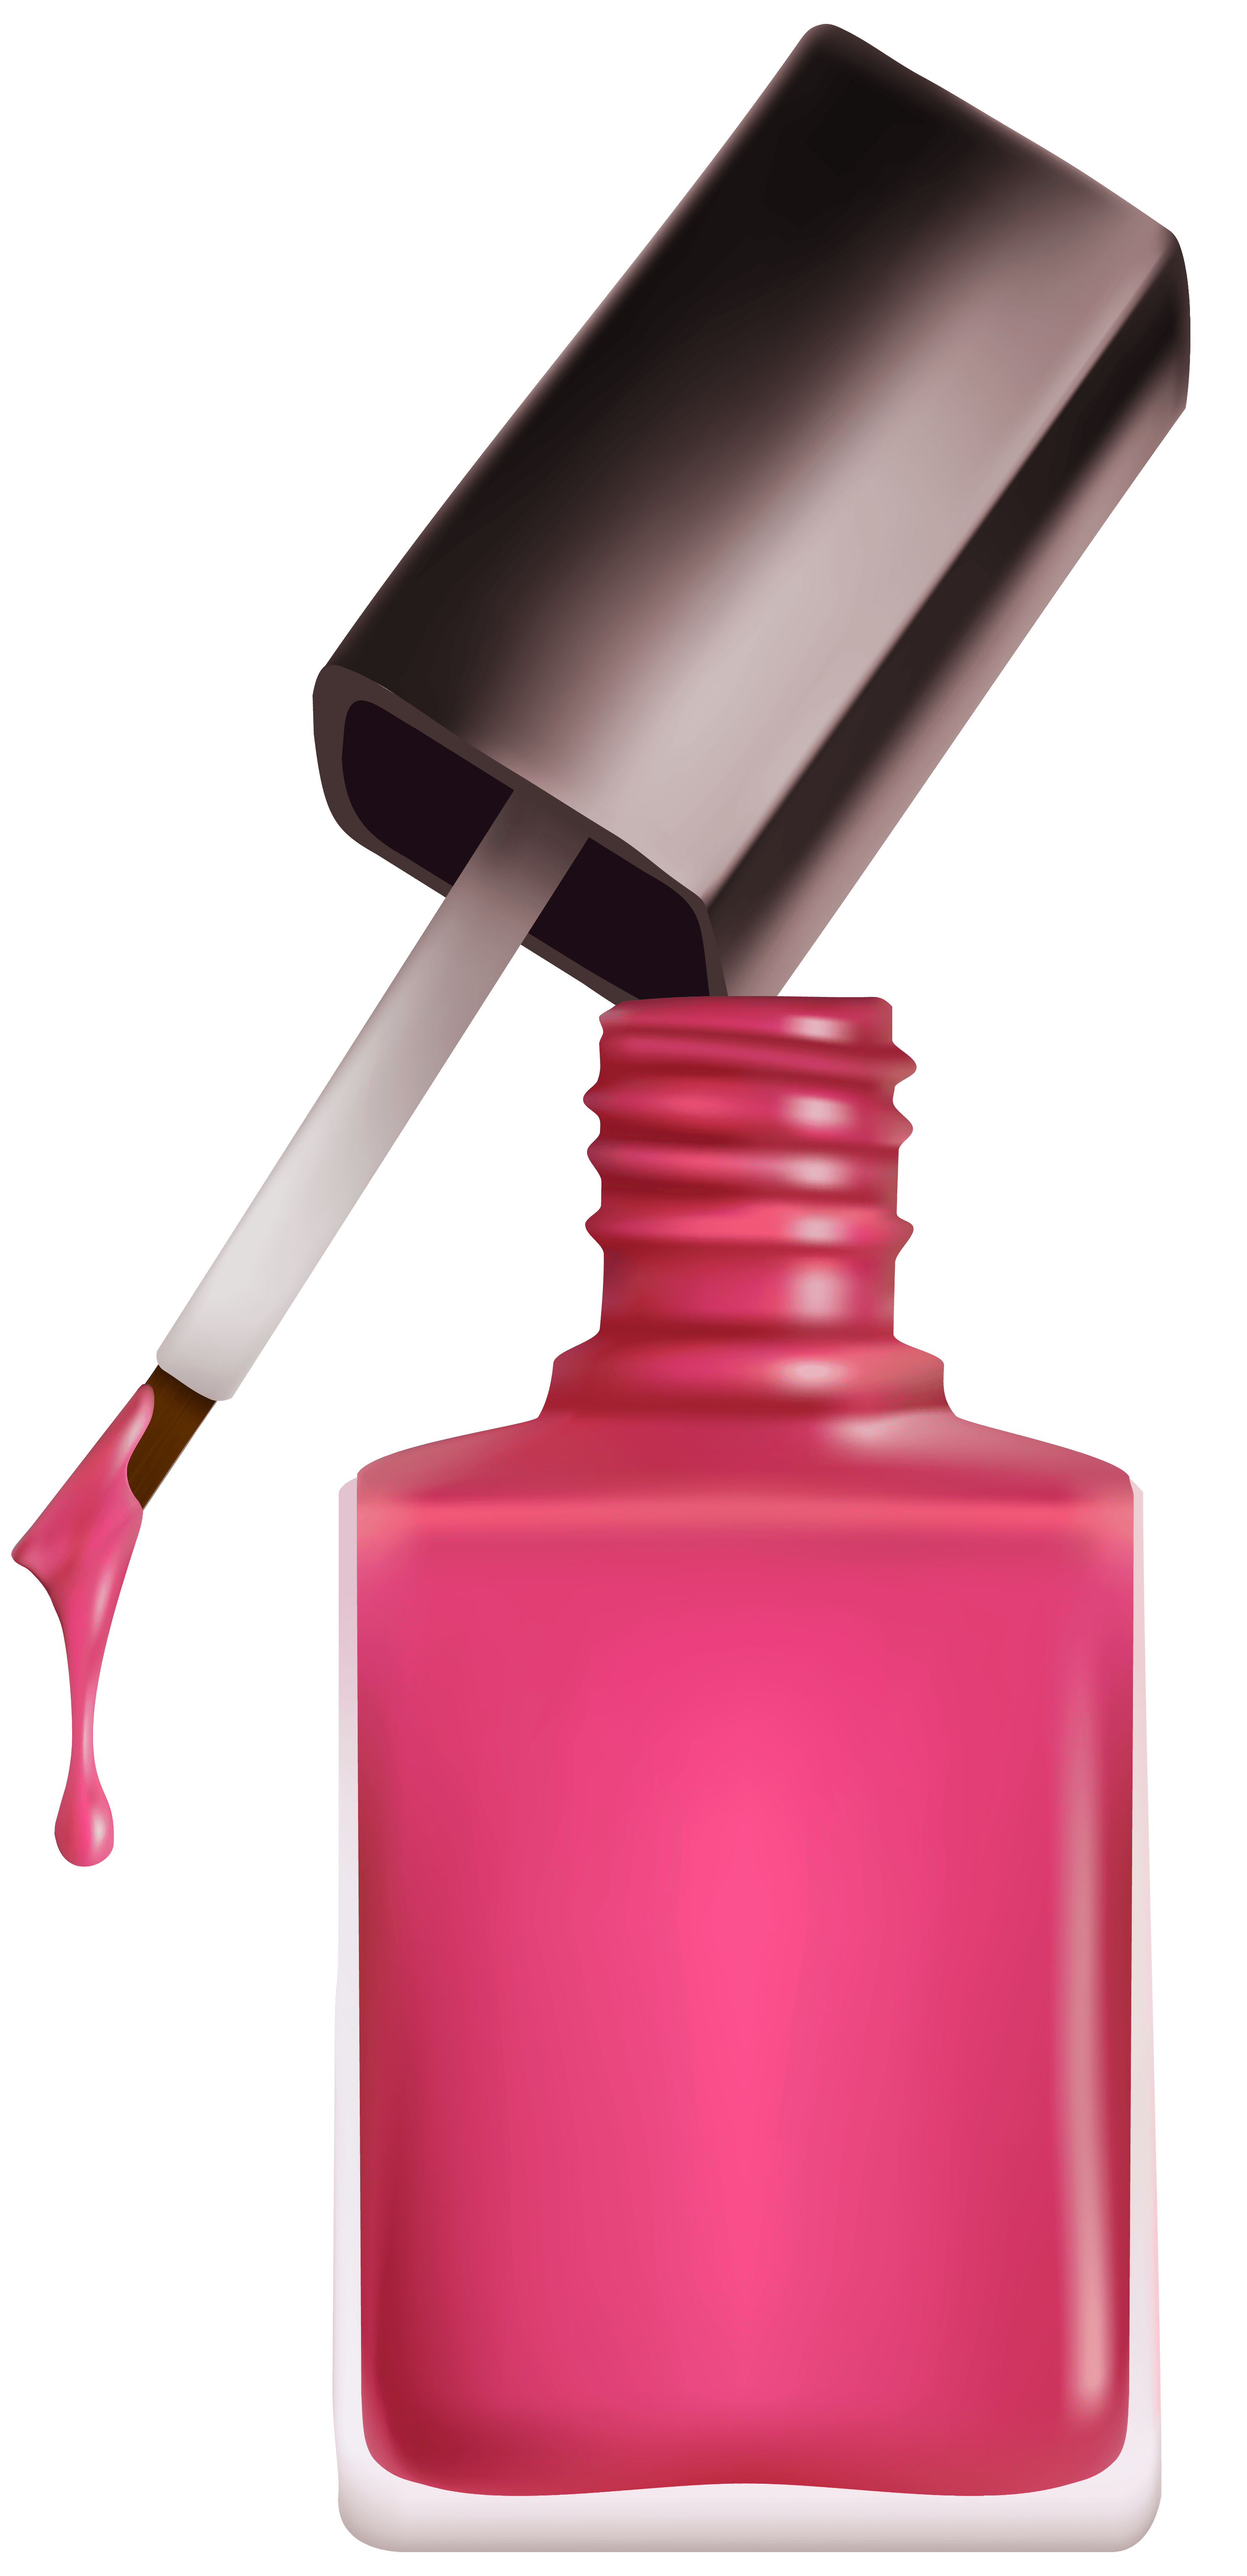 Nail Polish Dripping Png : Pngtree provides millions of free png ...